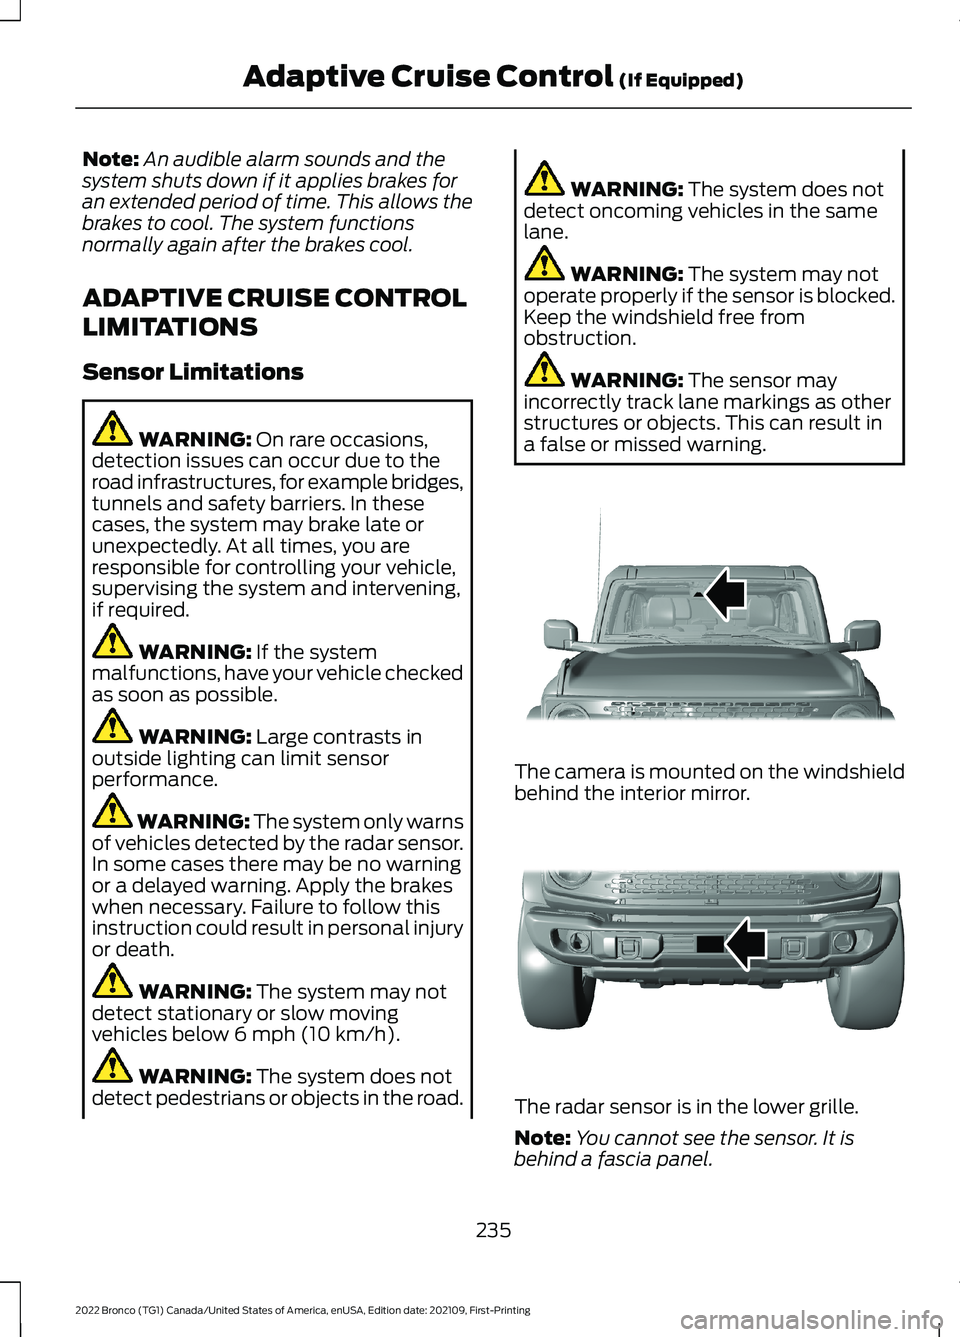 FORD BRONCO 2022  Owners Manual Note:An audible alarm sounds and thesystem shuts down if it applies brakes foran extended period of time. This allows thebrakes to cool. The system functionsnormally again after the brakes cool.
ADAPT